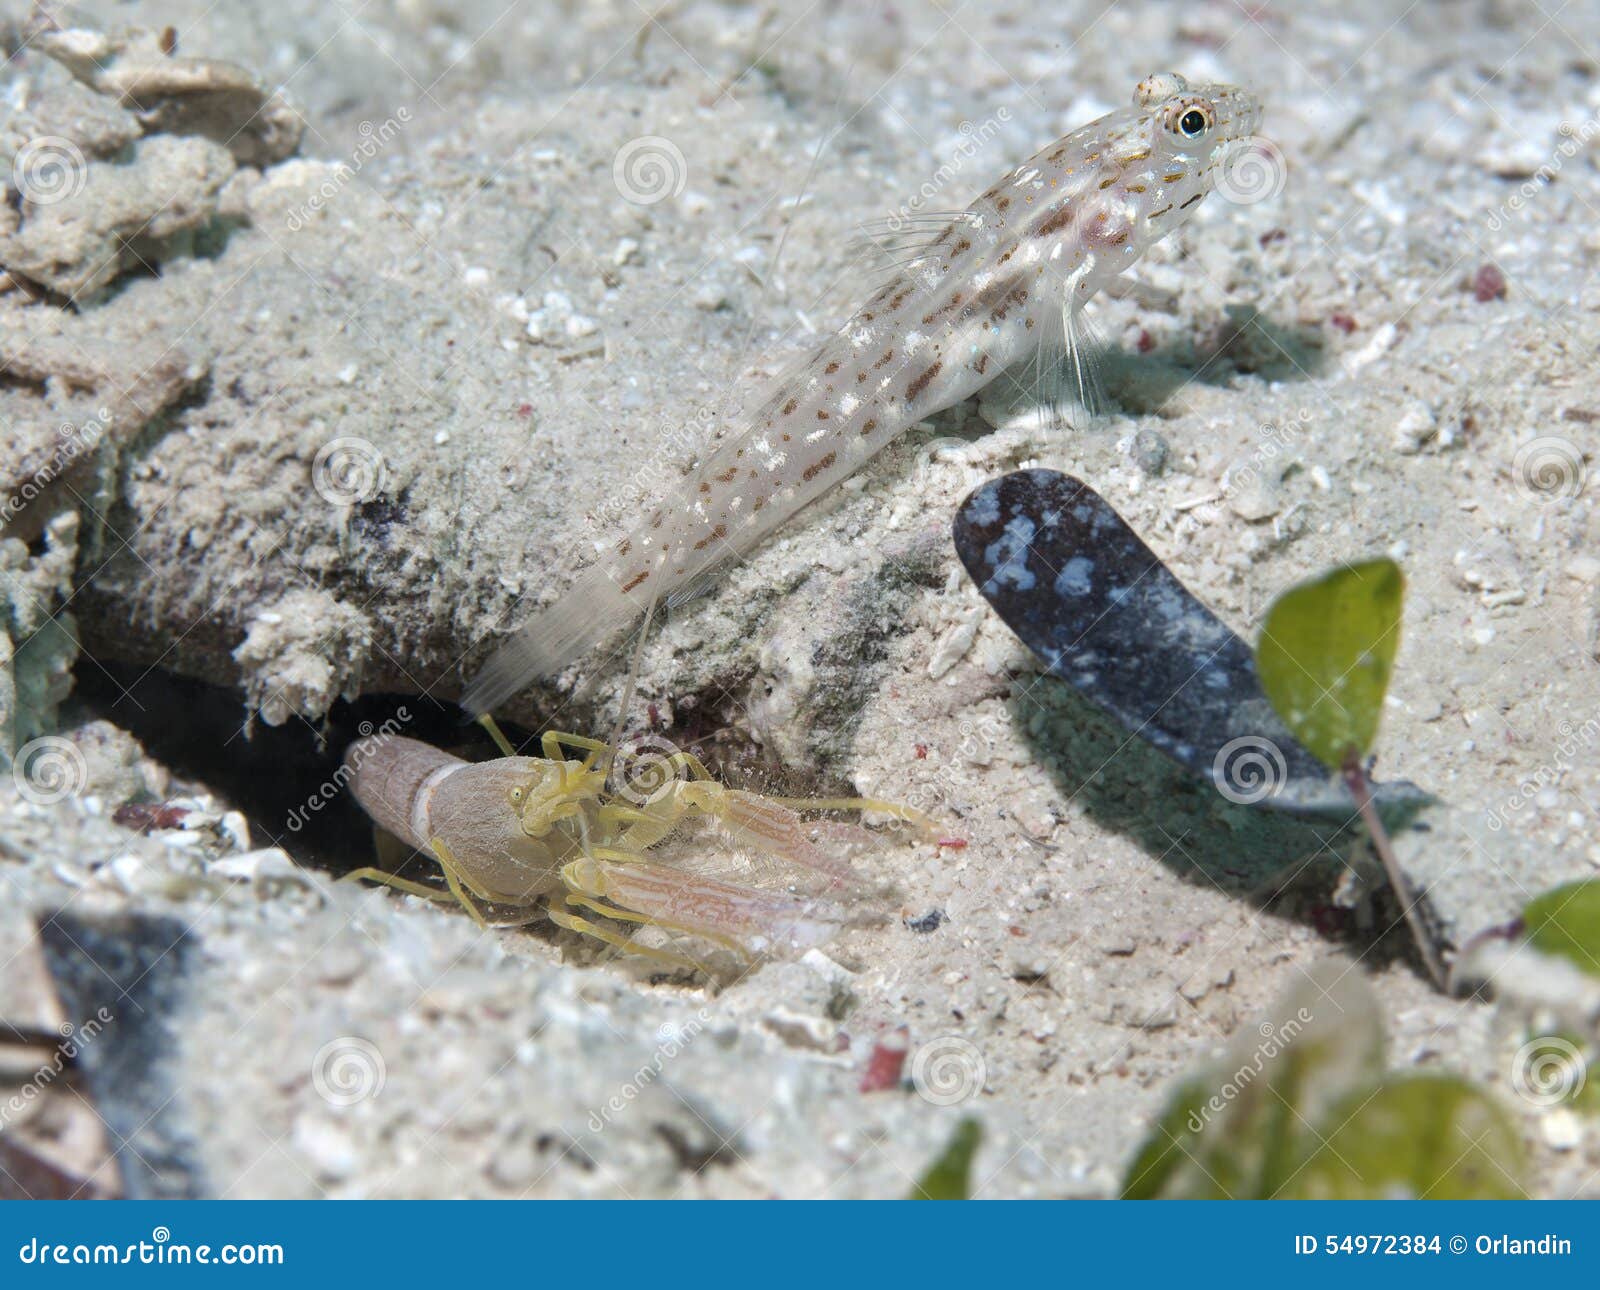 gold-streaked prawn-goby and djeddah snapping shrimp